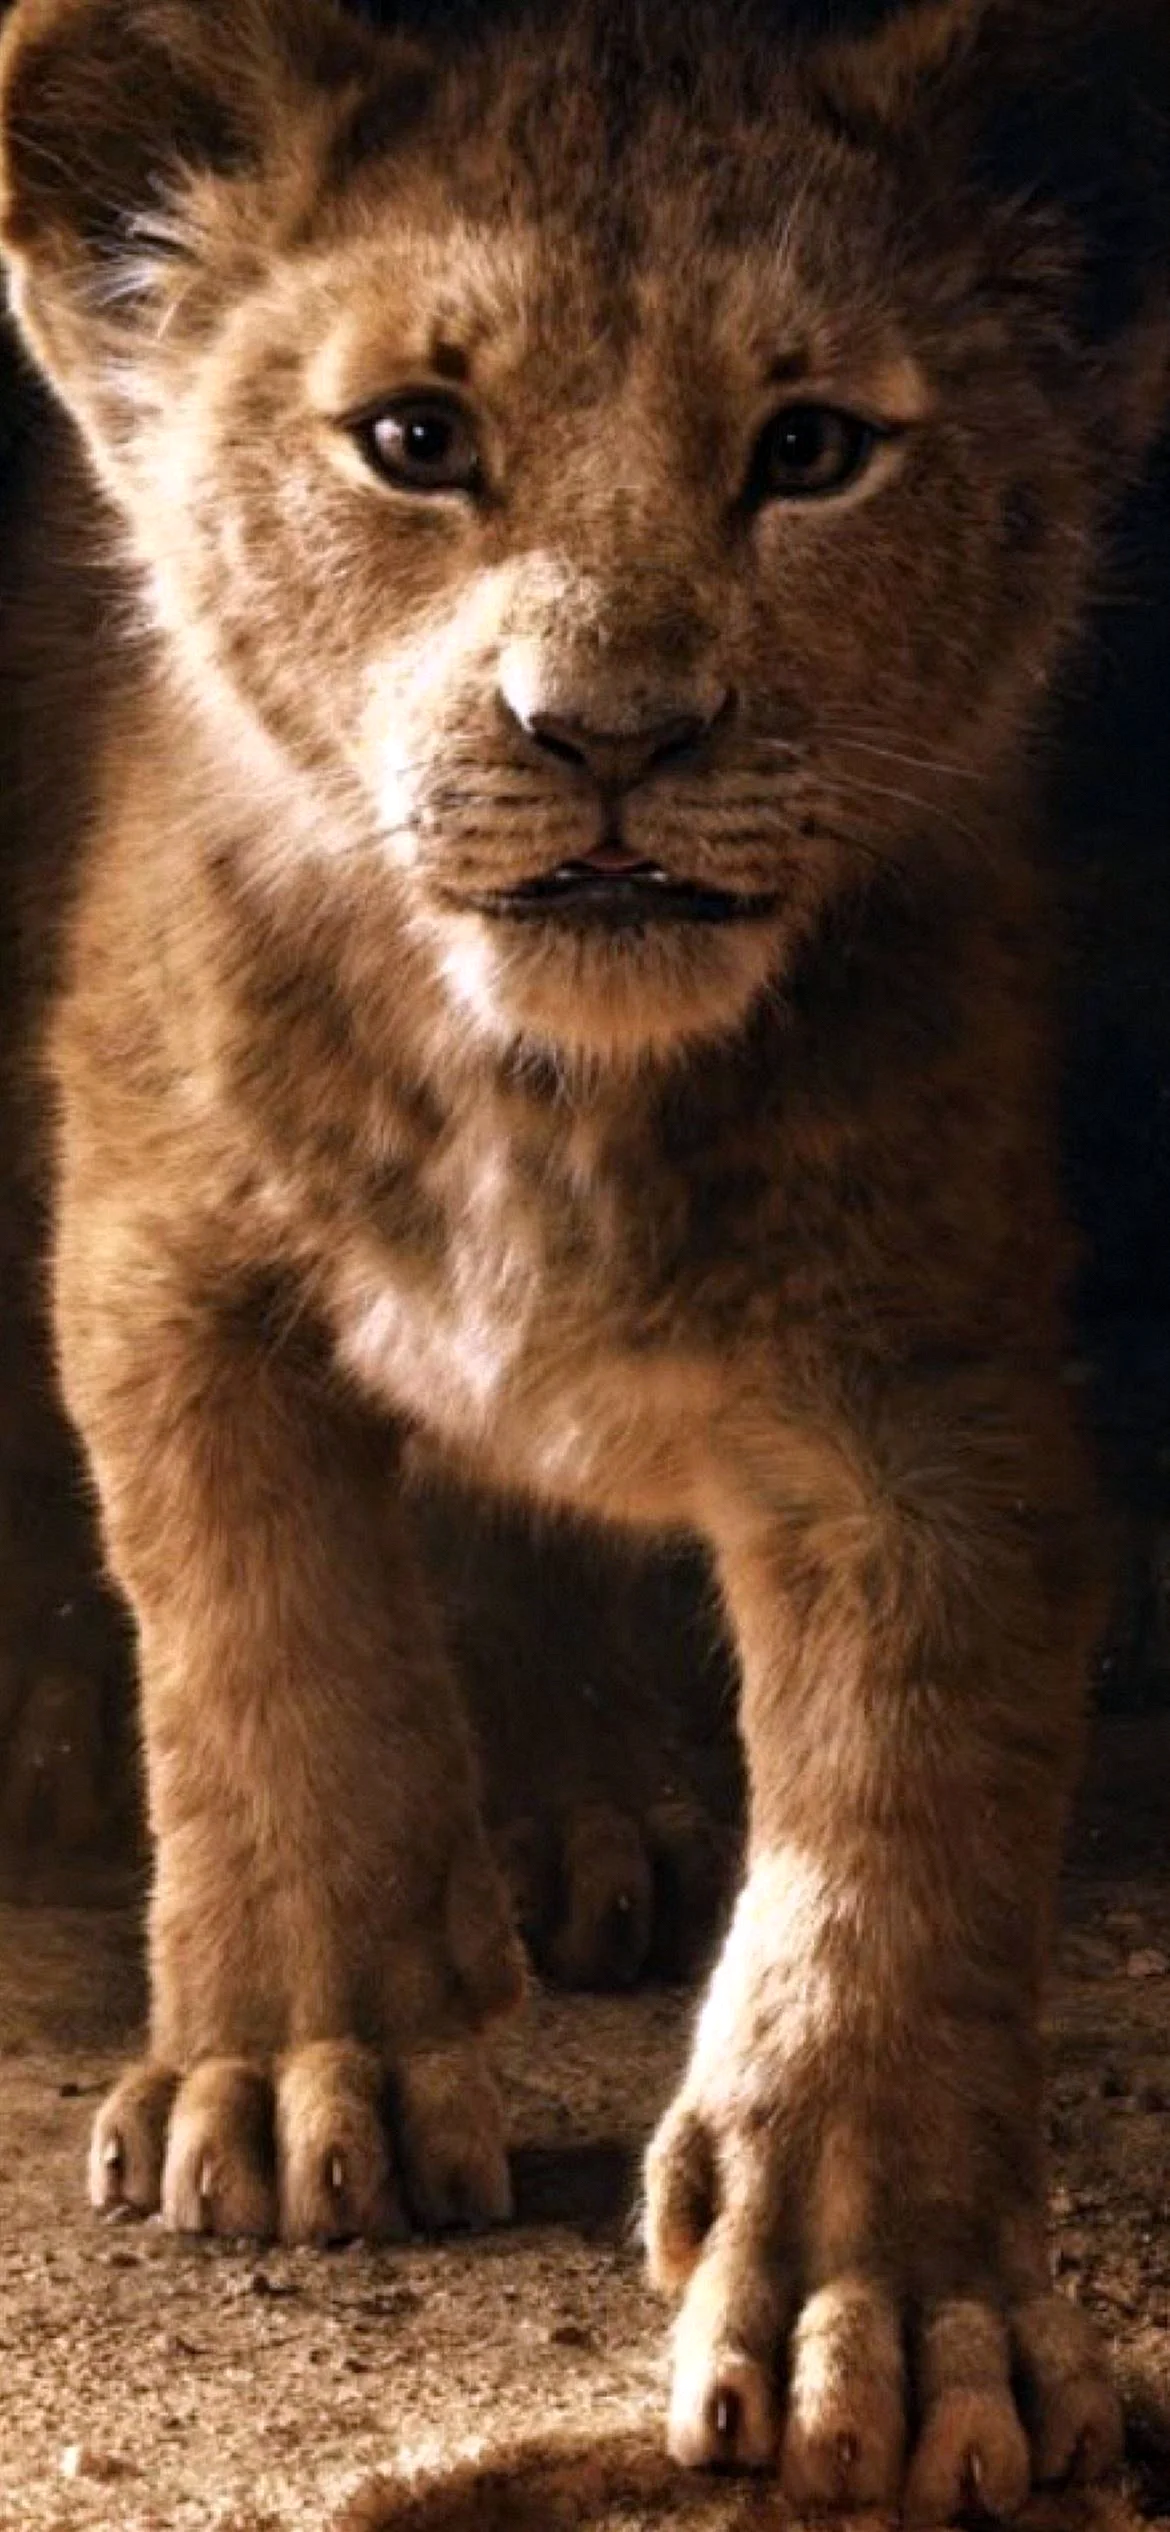 The Lion King 2019 Wallpaper for iPhone 13